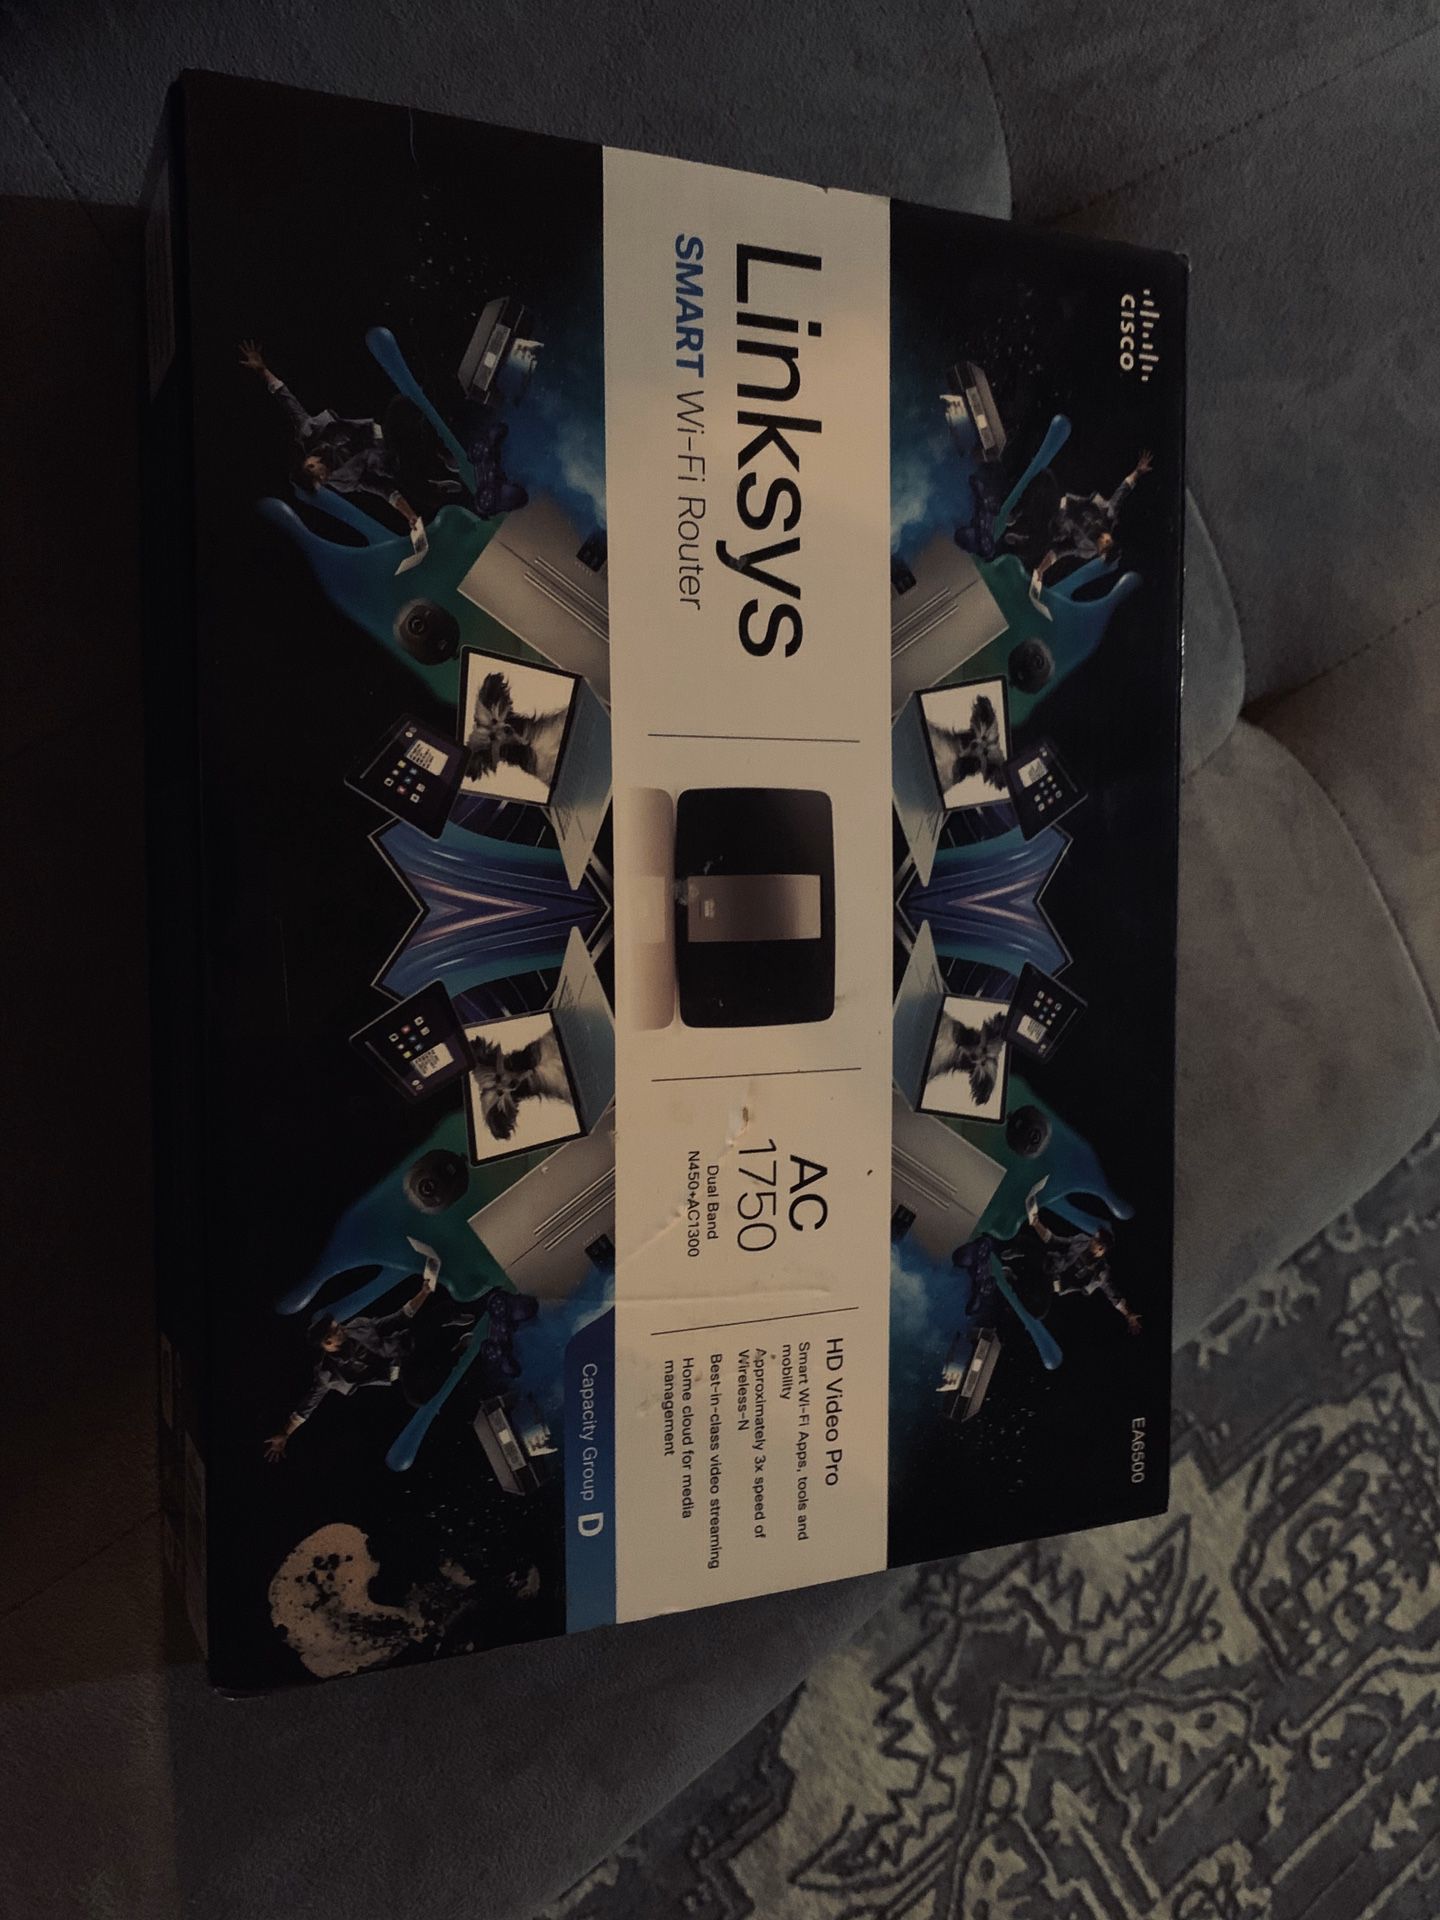 Linksys WiFi router